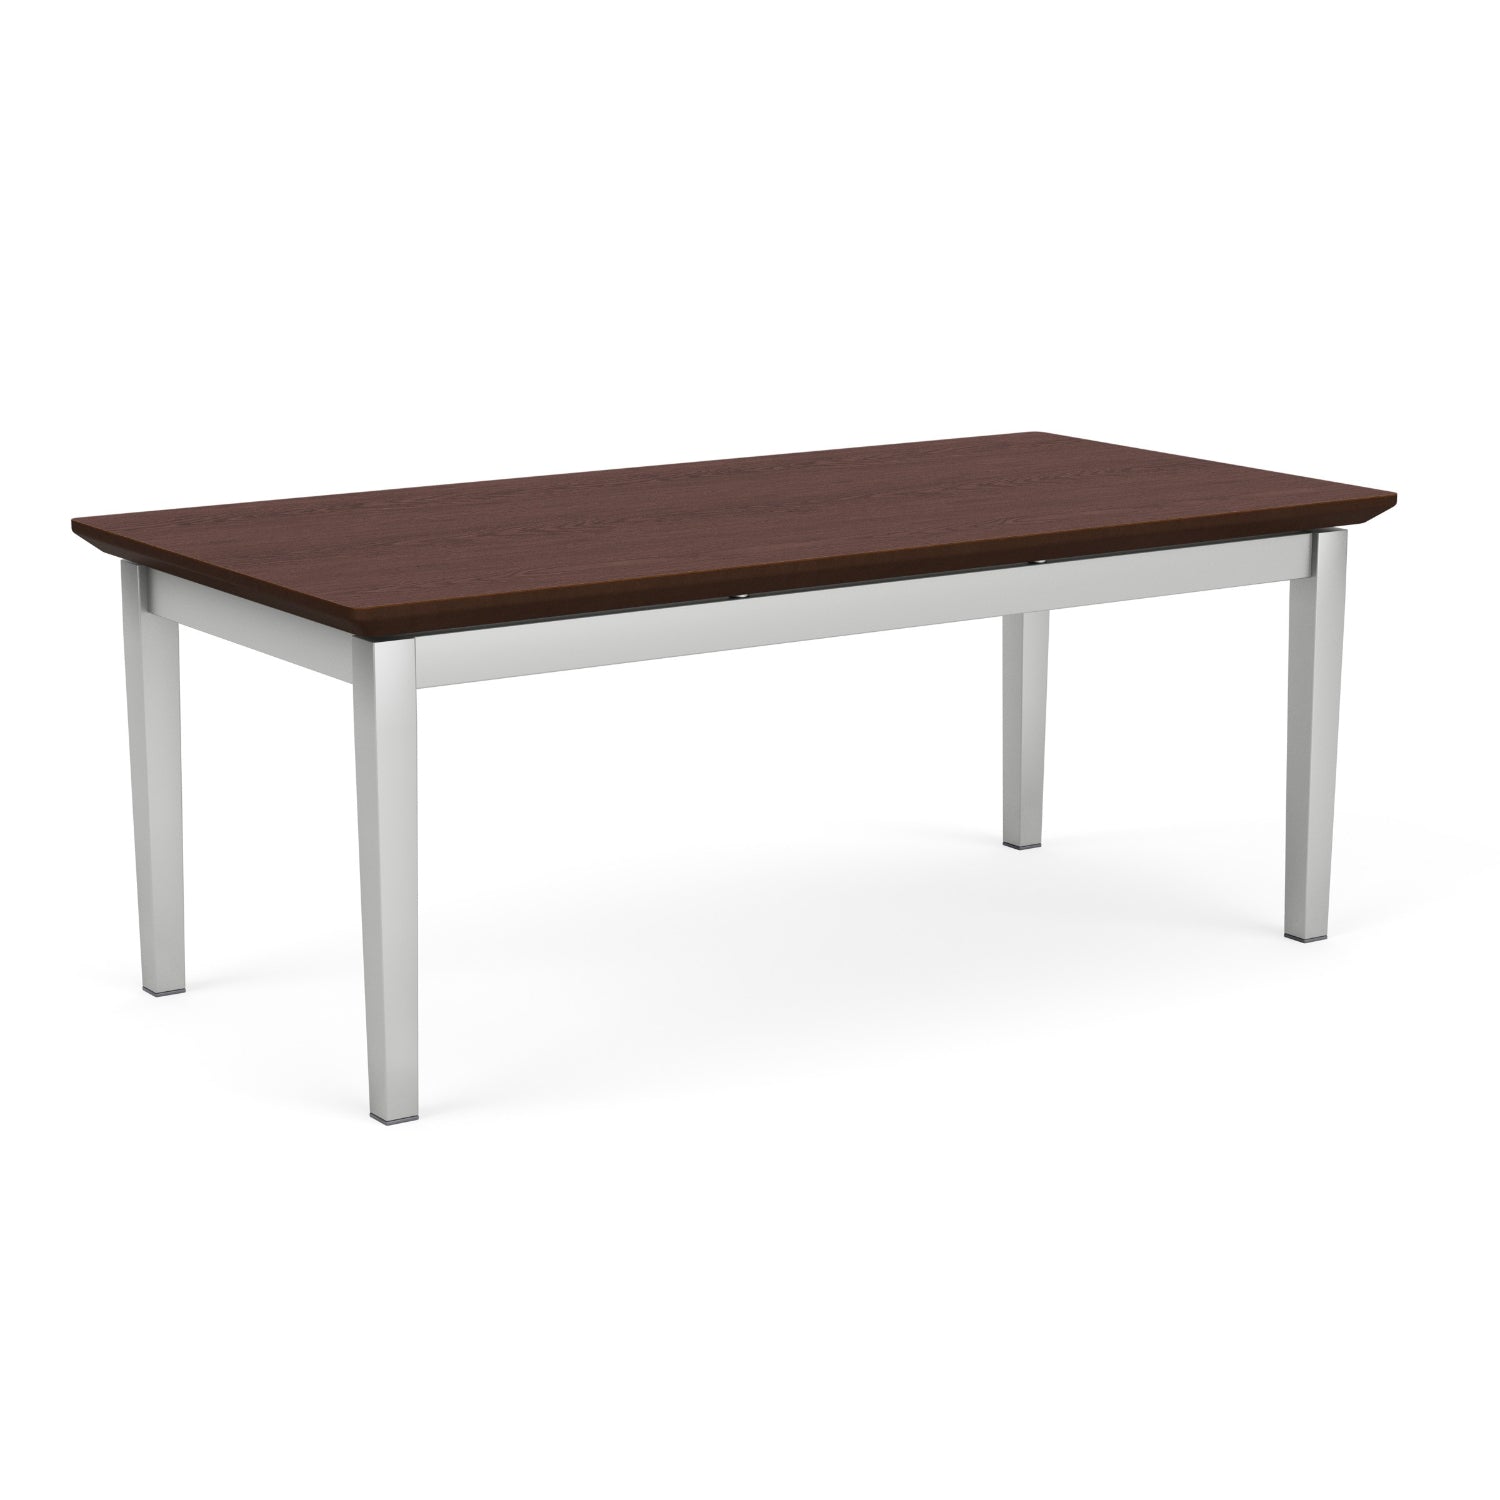 Amherst Steel Collection Coffee Table with Laminate Tabletop, FREE SHIPPING